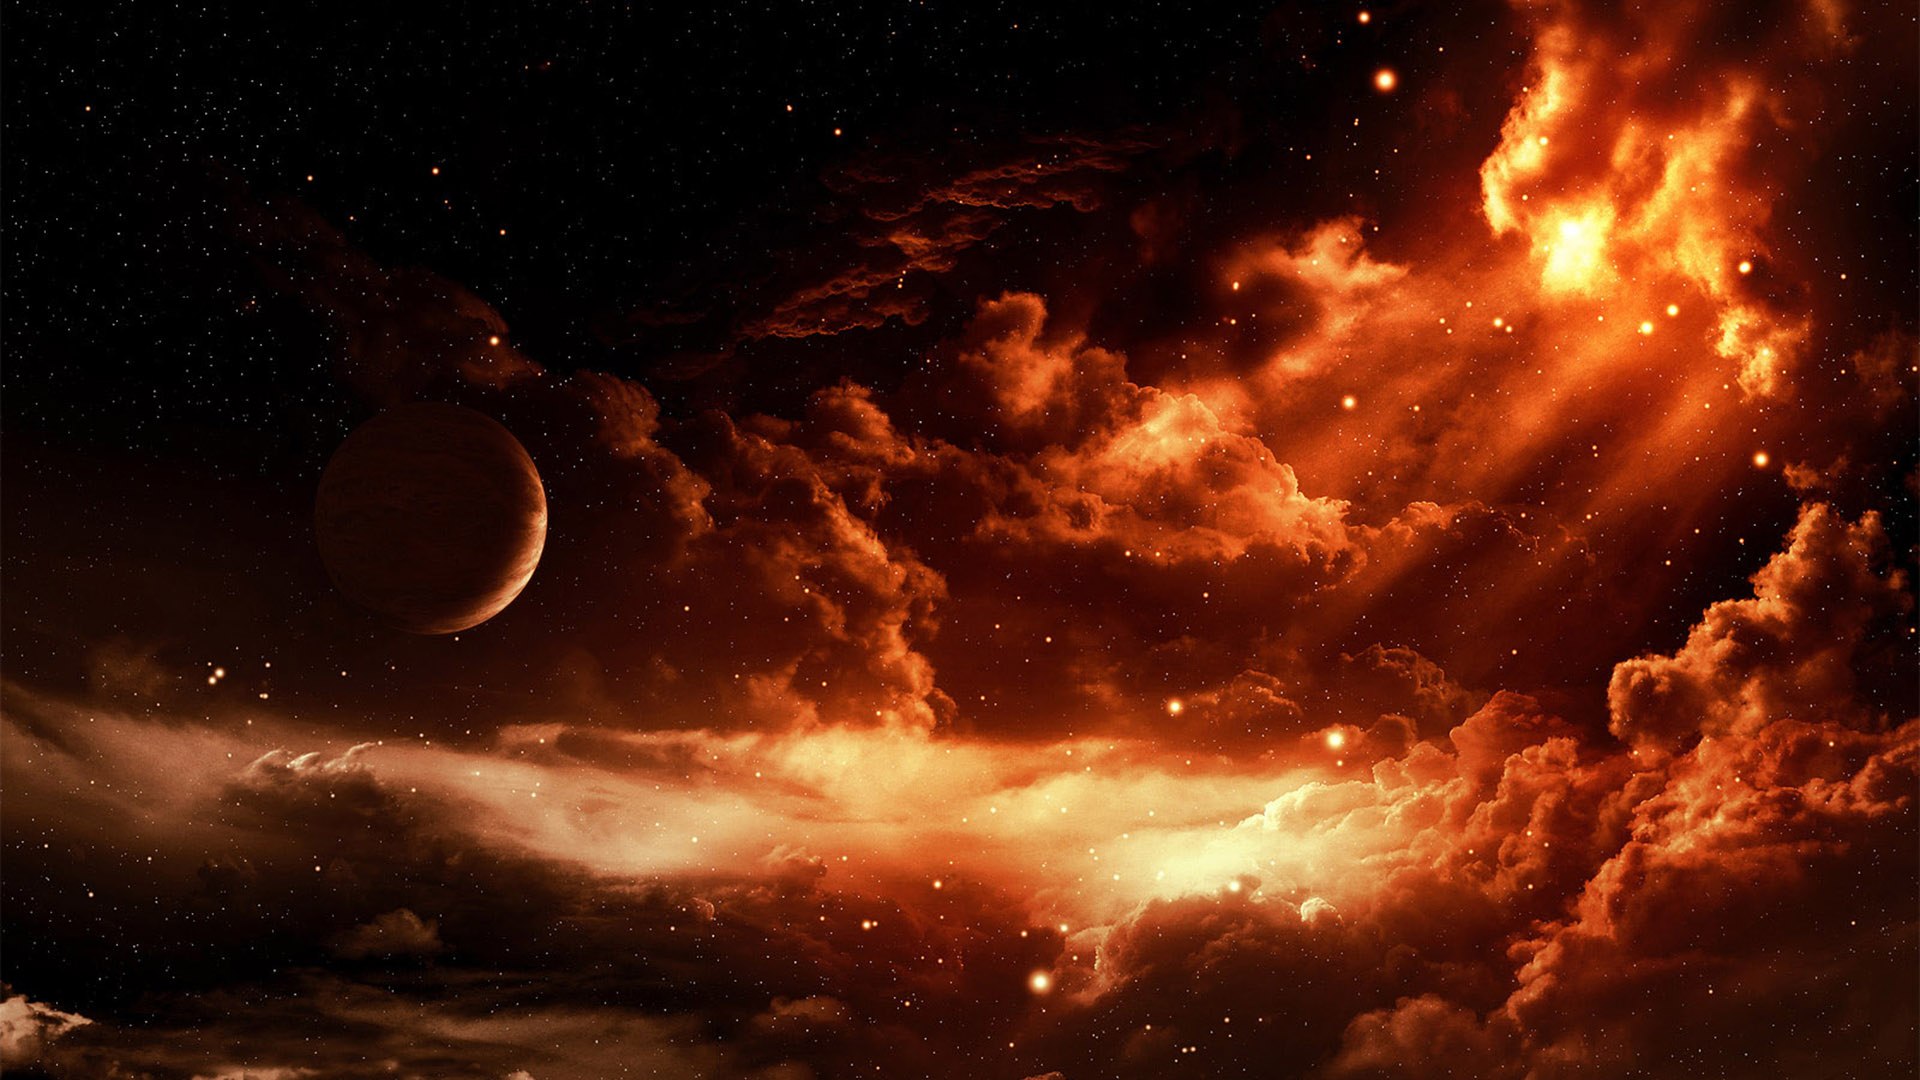 Space sunset wallpaper 1920x1080 - (#41693) - High Quality and ...